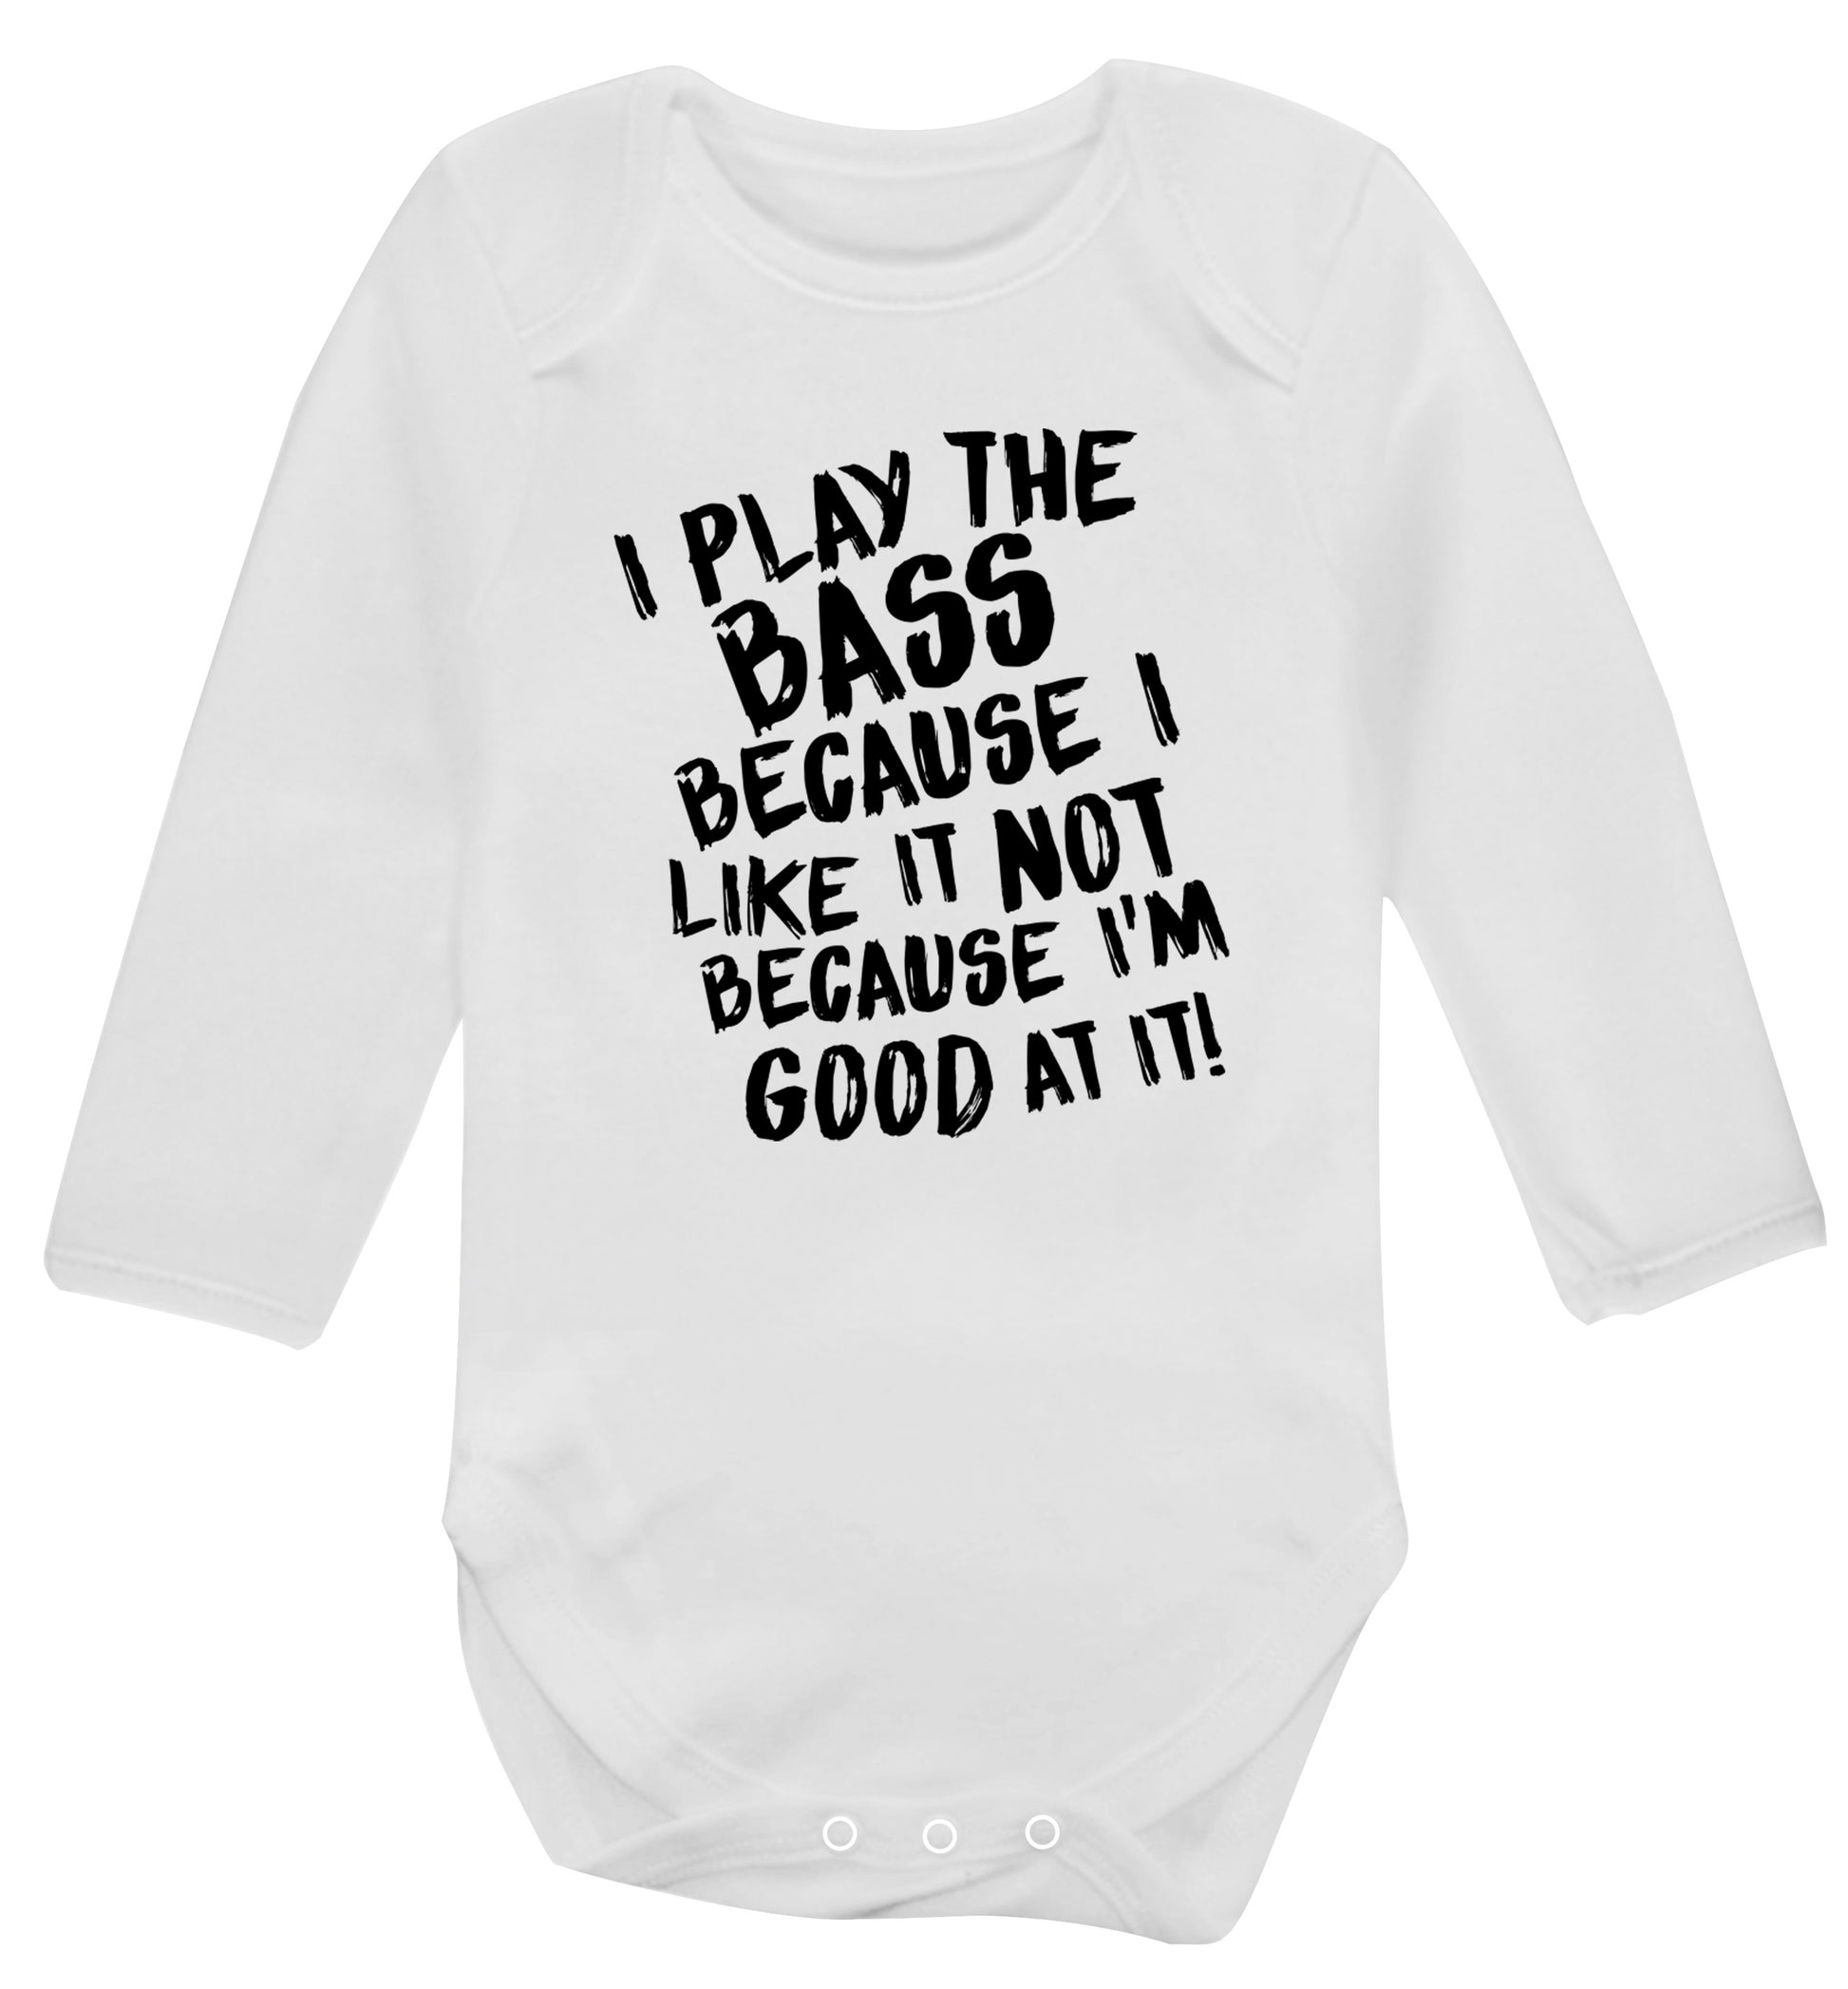 I play the bass because I like it not because I'm good at it Baby Vest long sleeved white 6-12 months